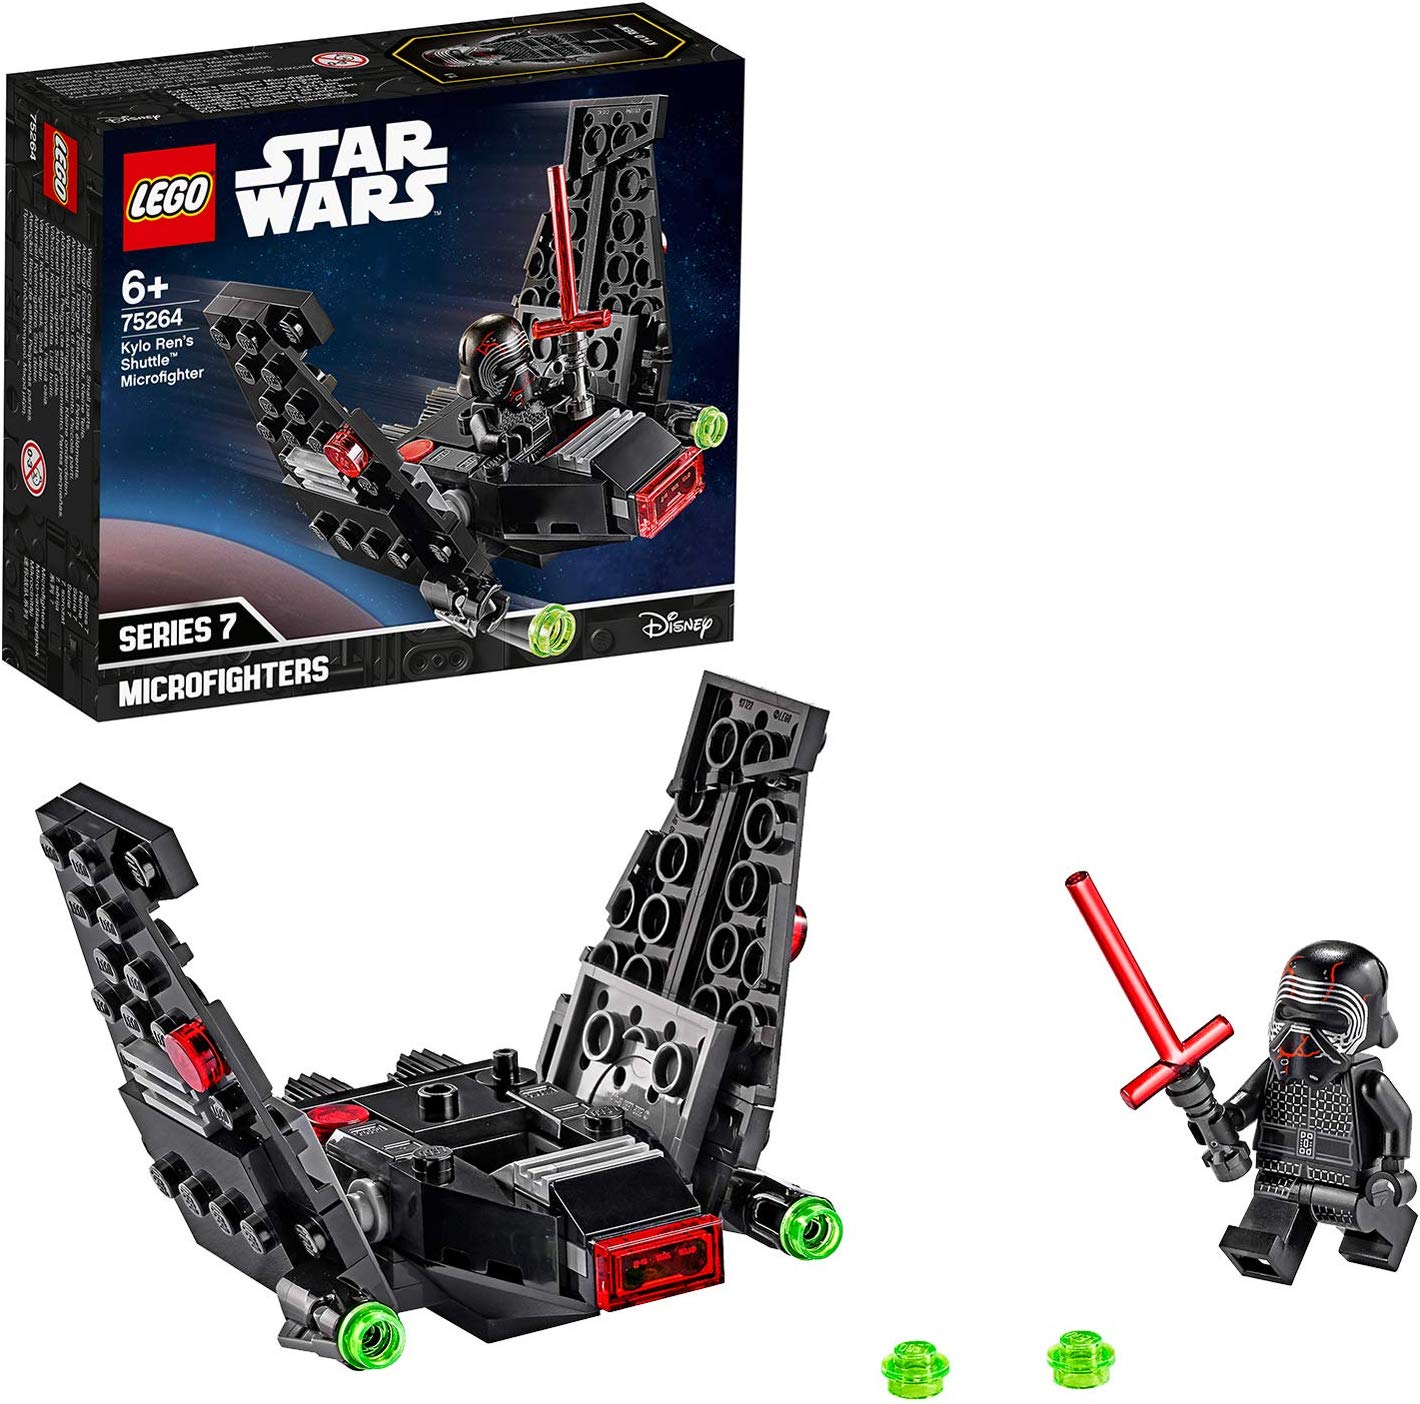 LEGO 75264 Kylo Rens Shuttle Microfighter, Star Wars, Construction Kit